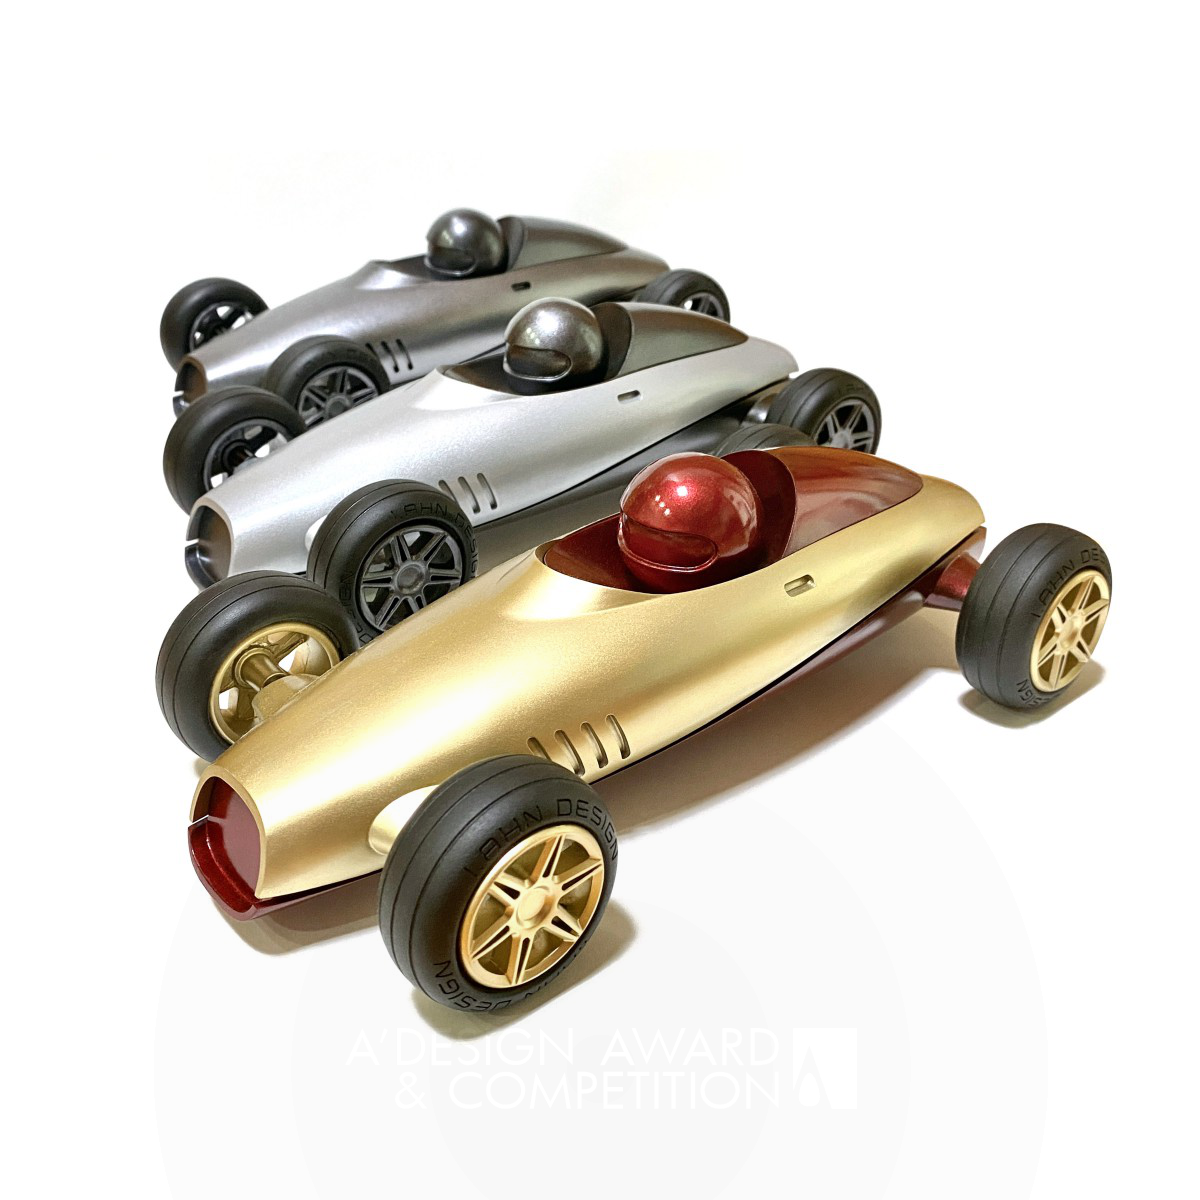 Racer Toy